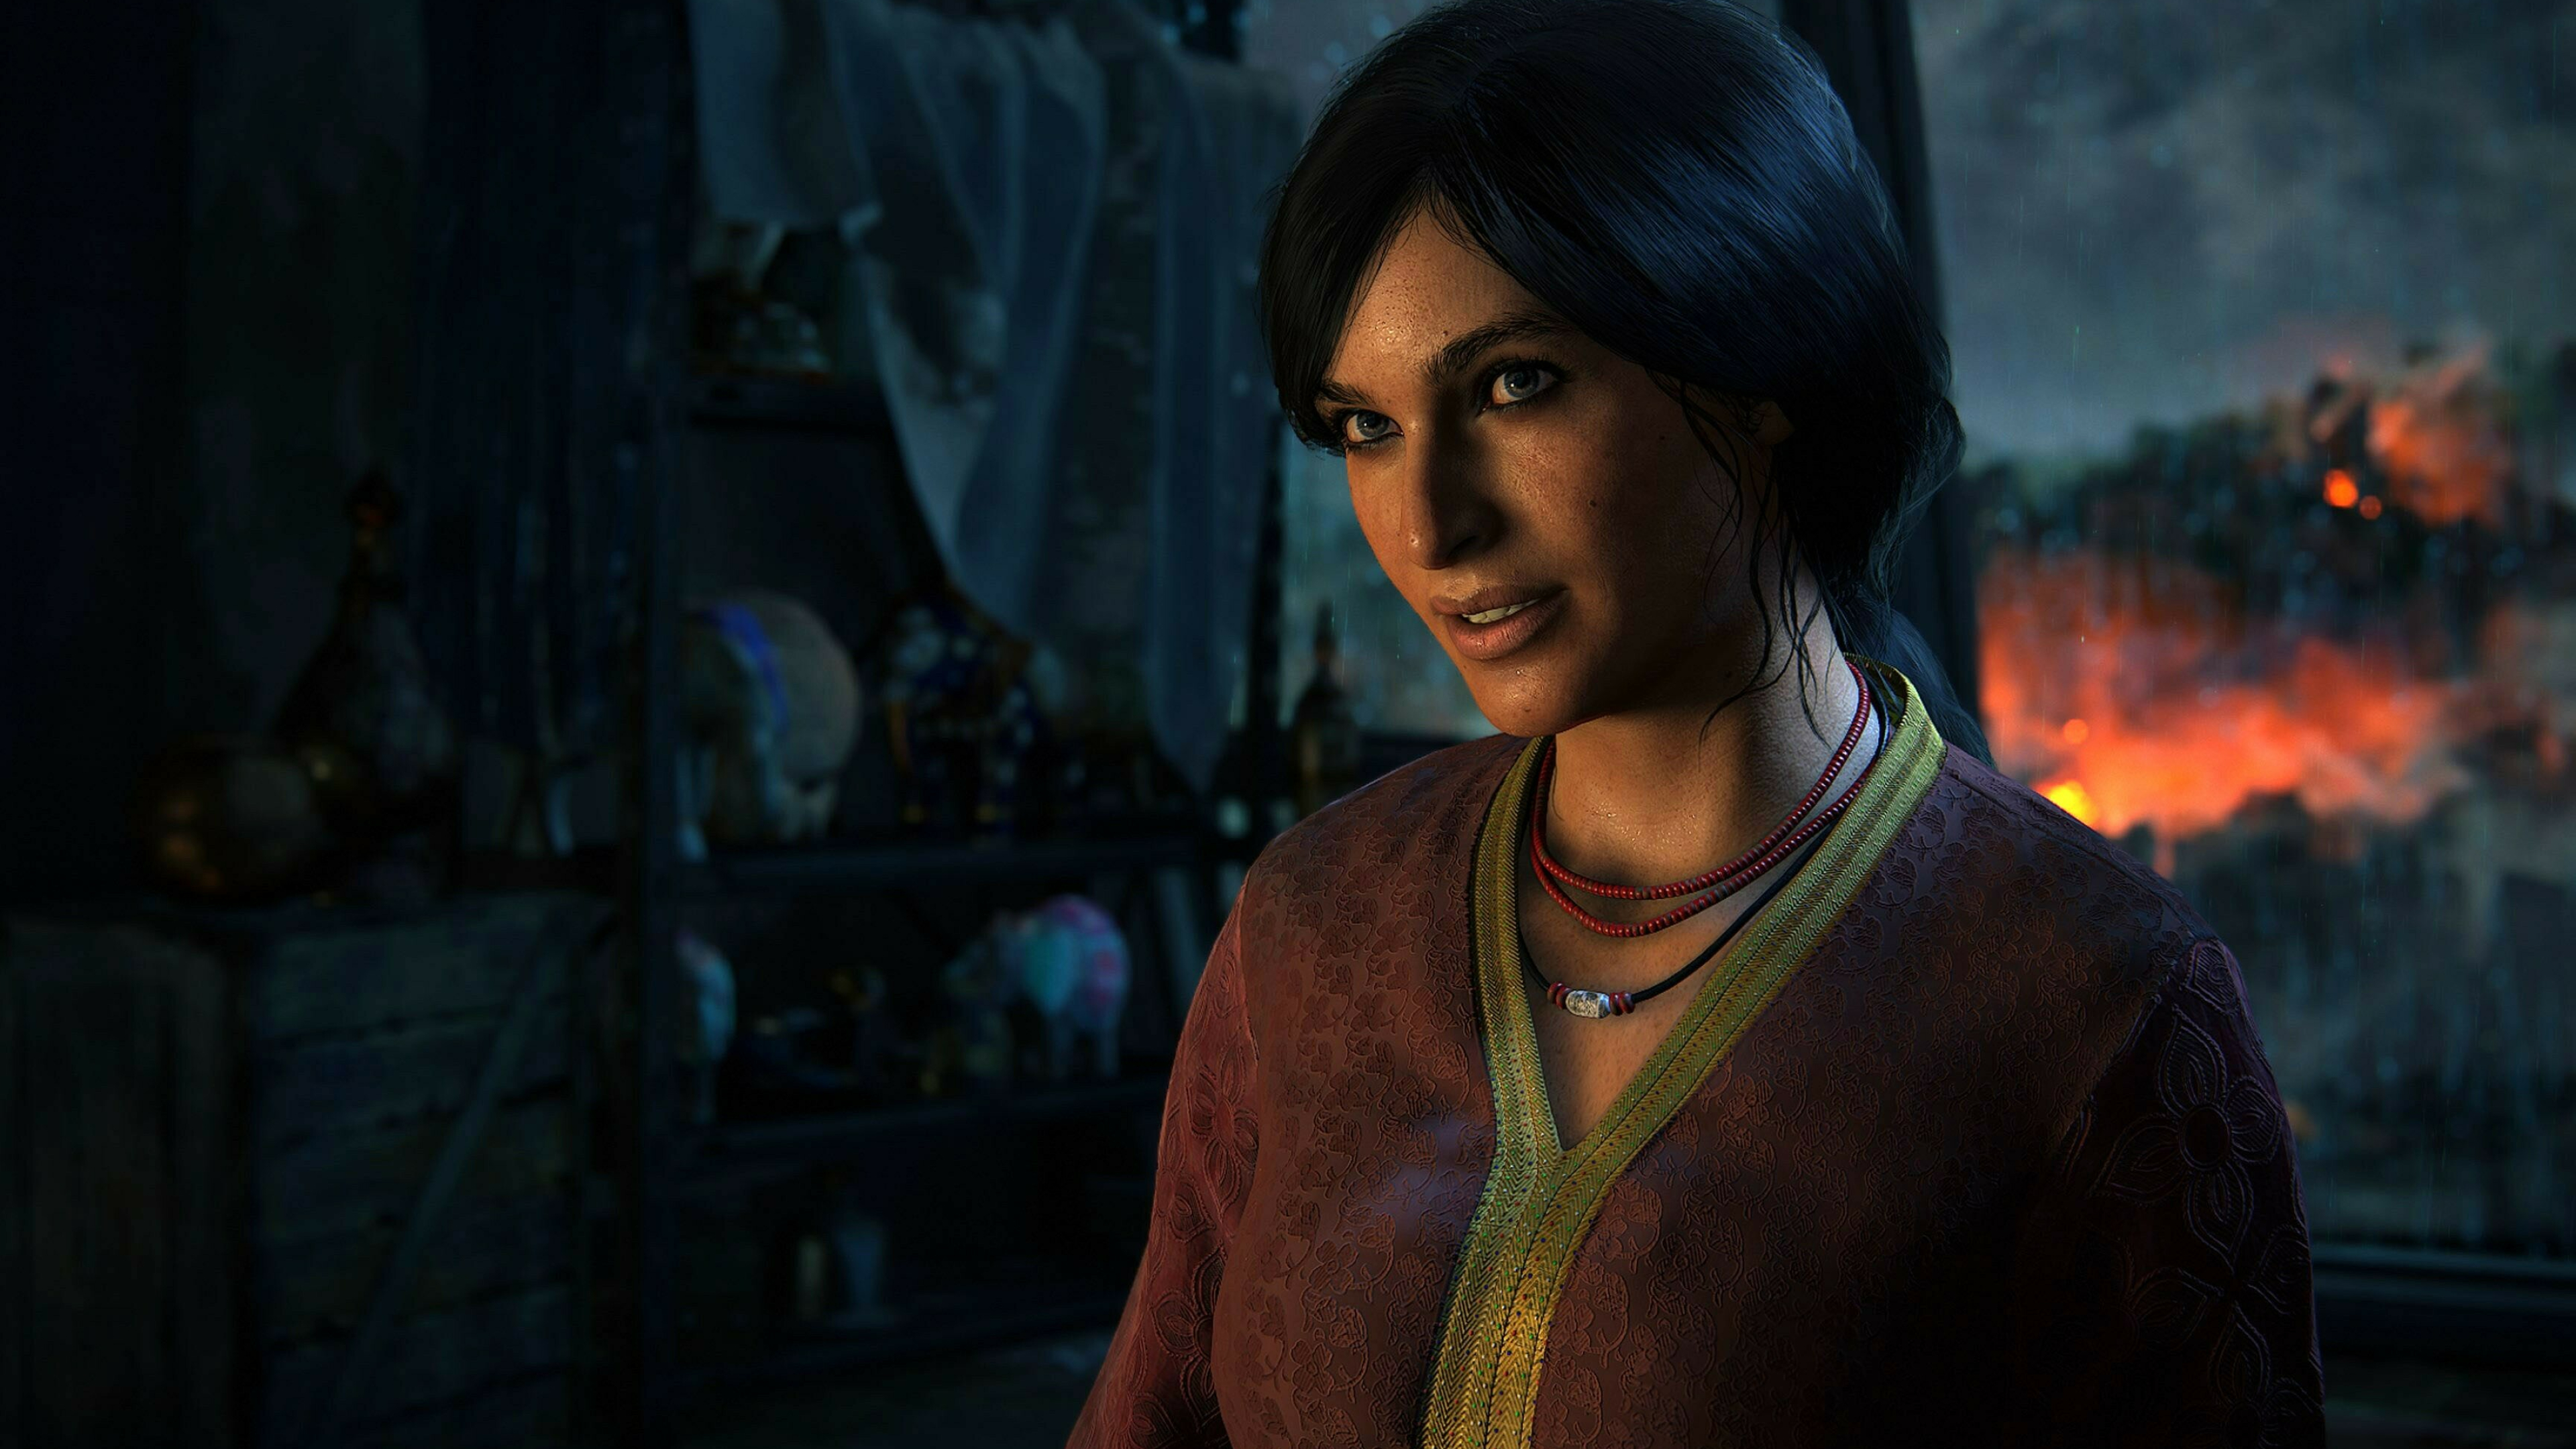 Uncharted: Players control Chloe Frazer, who seeks the Tusk of Ganesh in the Western Ghats mountain ranges of India, with the help of ex-mercenary Nadine Ross, and prevent a ruthless warlord and his army of insurgents from igniting a civil war in the country. 3840x2160 4K Wallpaper.